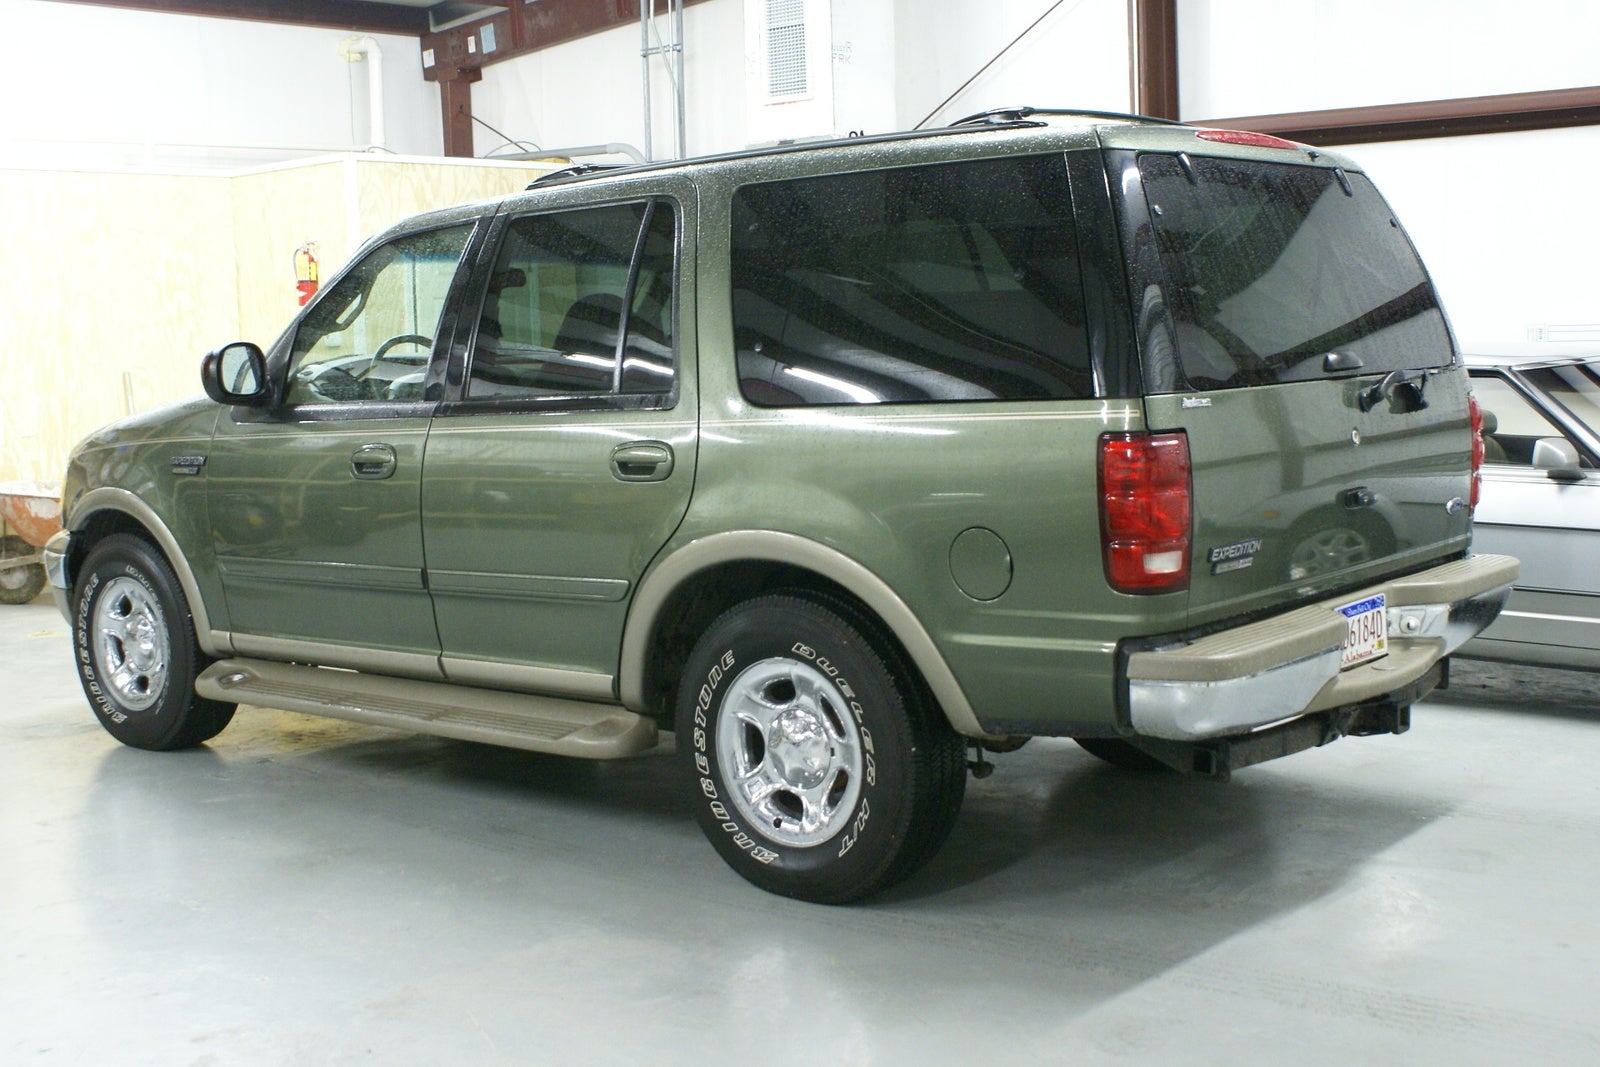 2000 Eddie bauer ford expedition review #2